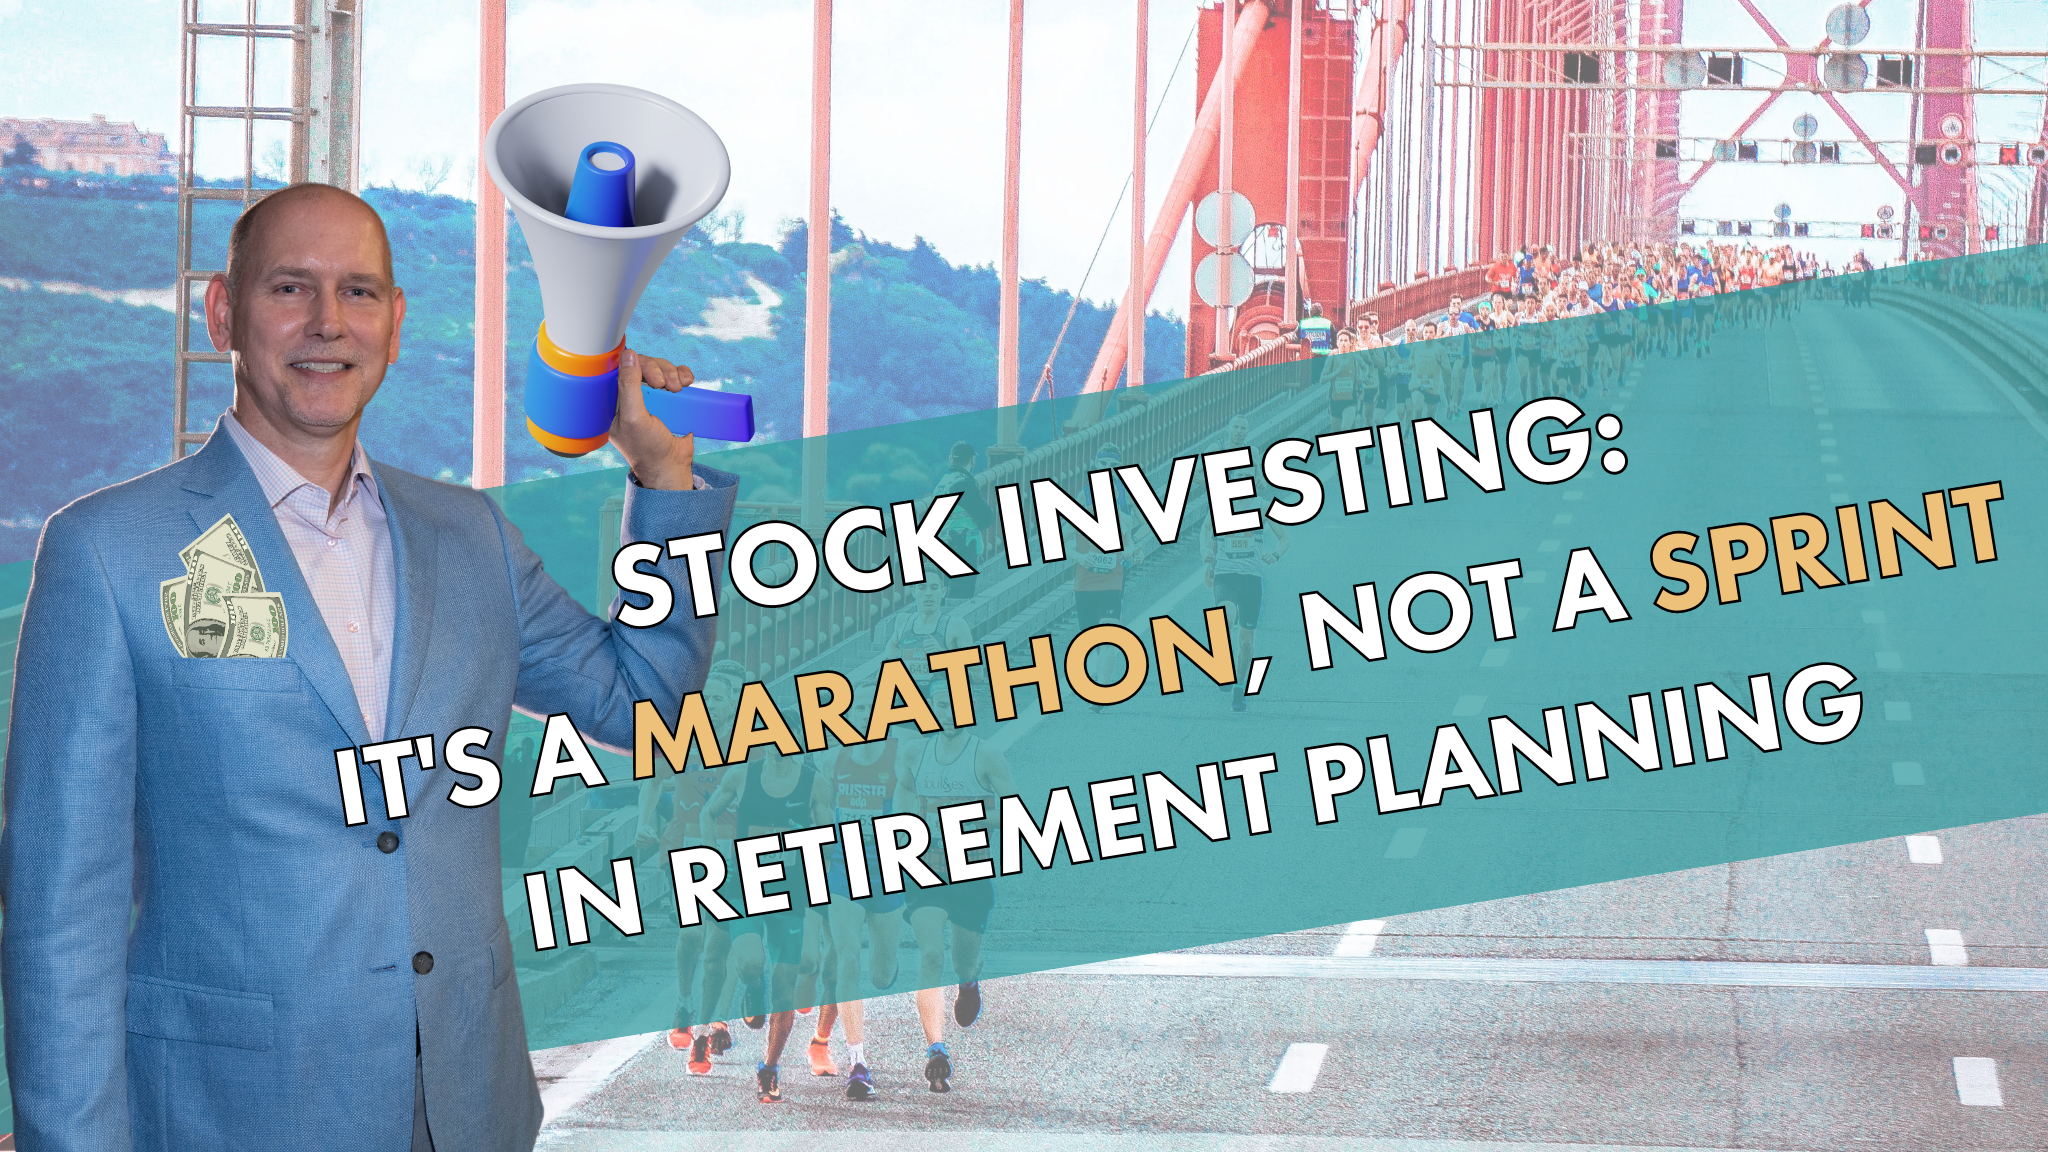 Stock Investing: It's a marathon, not a sprint in retirement planning